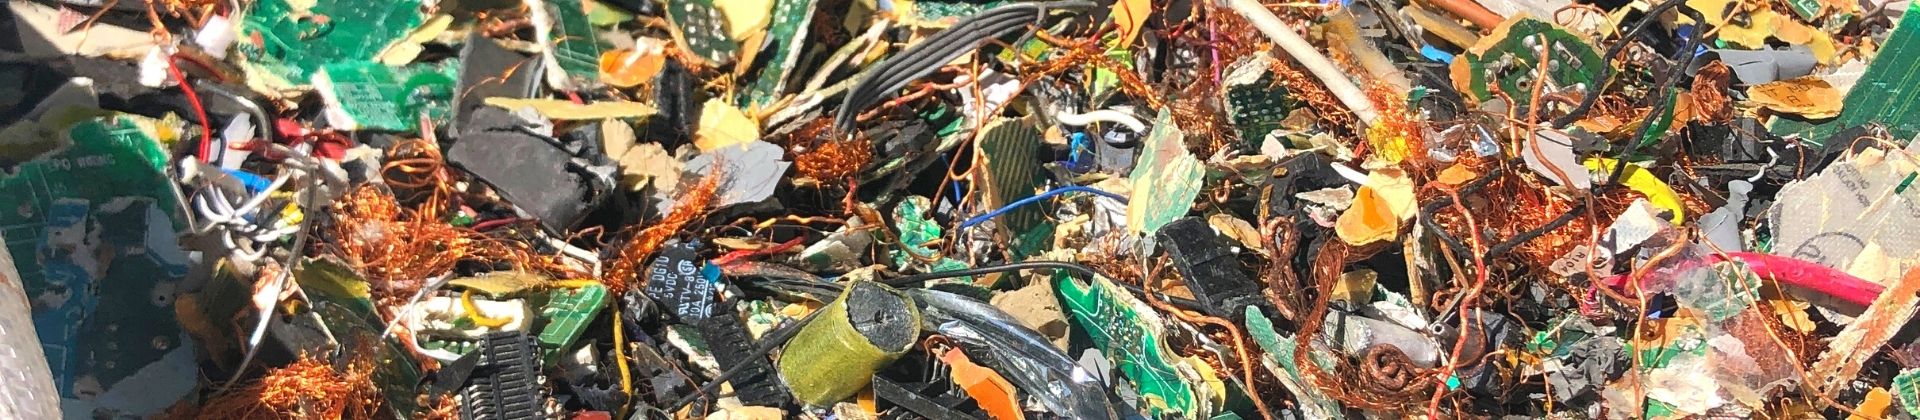 materials recovered from e-waste